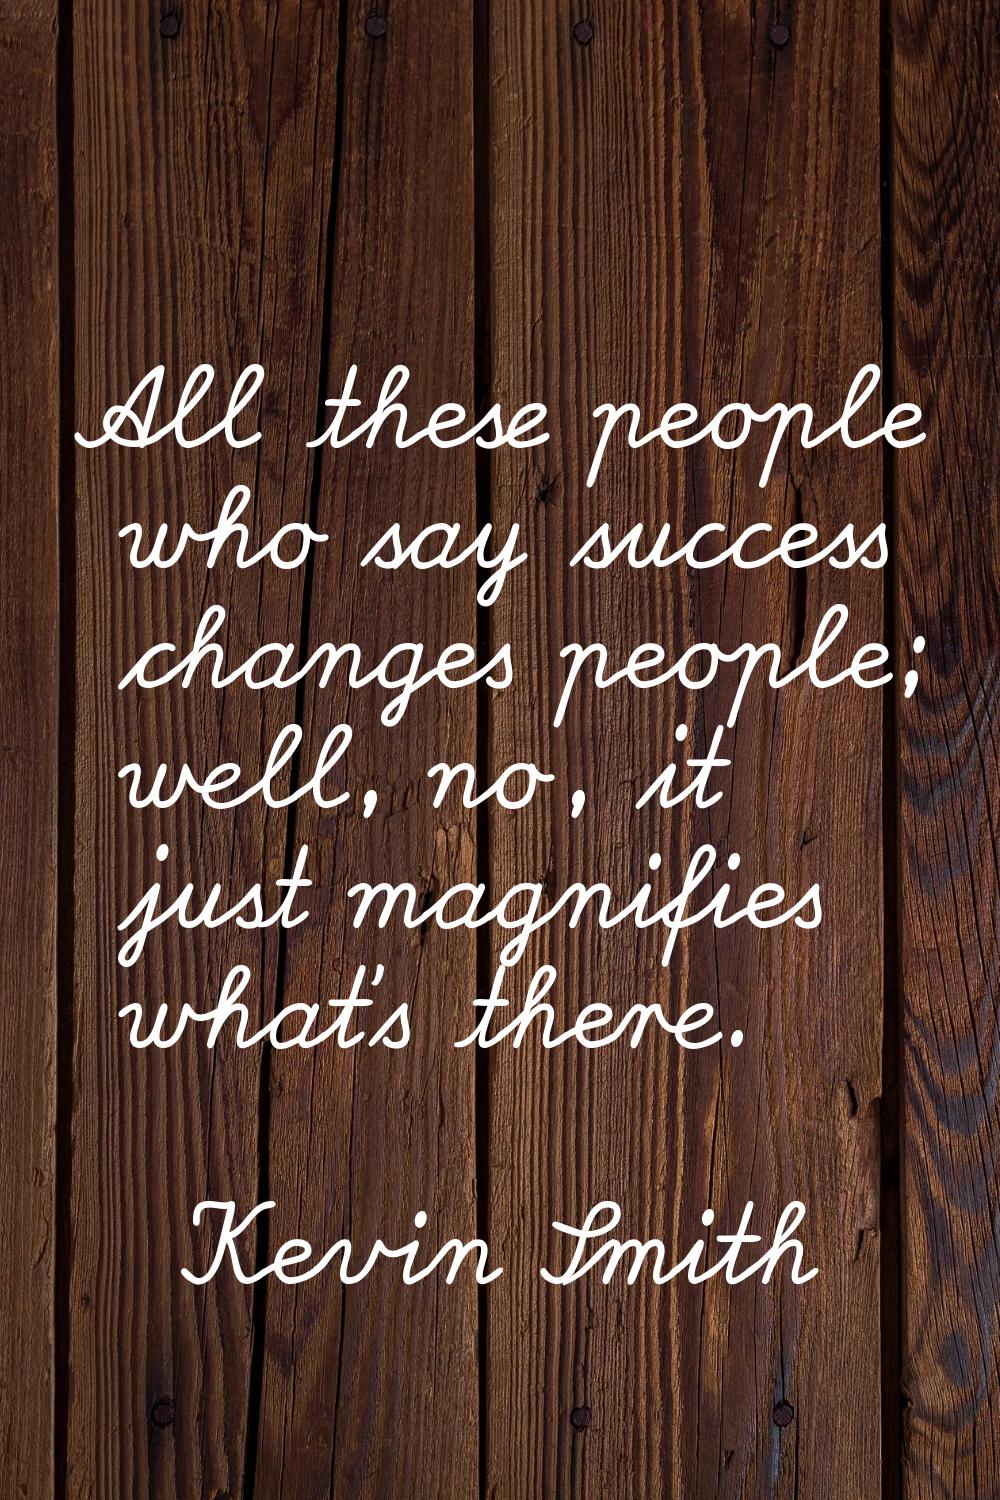 All these people who say success changes people; well, no, it just magnifies what's there.